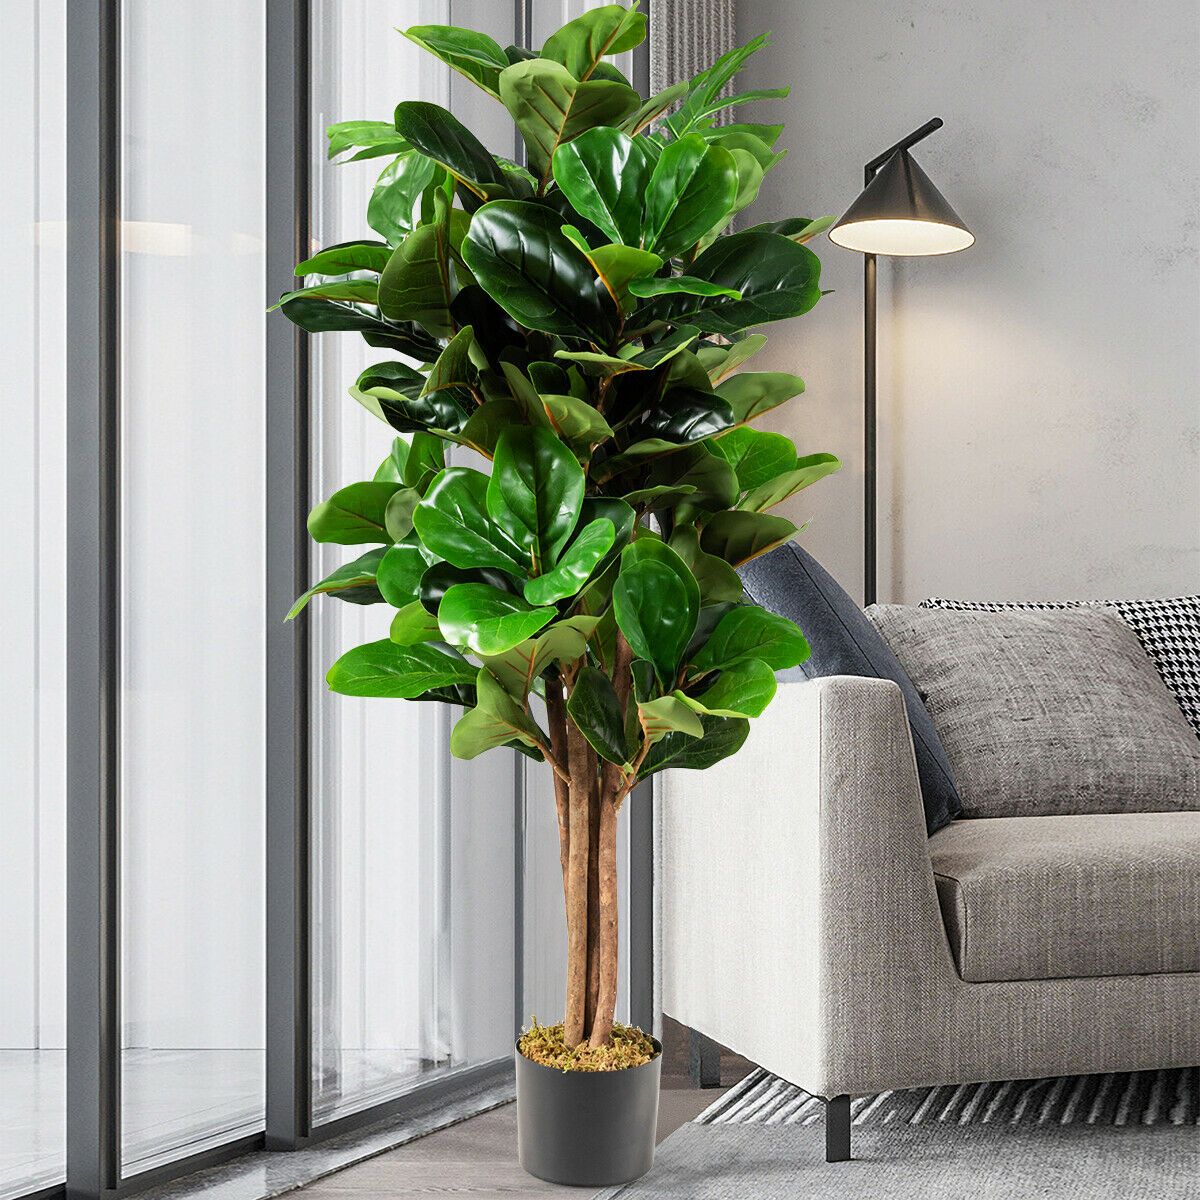 Decorative Artificial Fiddle Leaf Fig Tree for the Home and Office